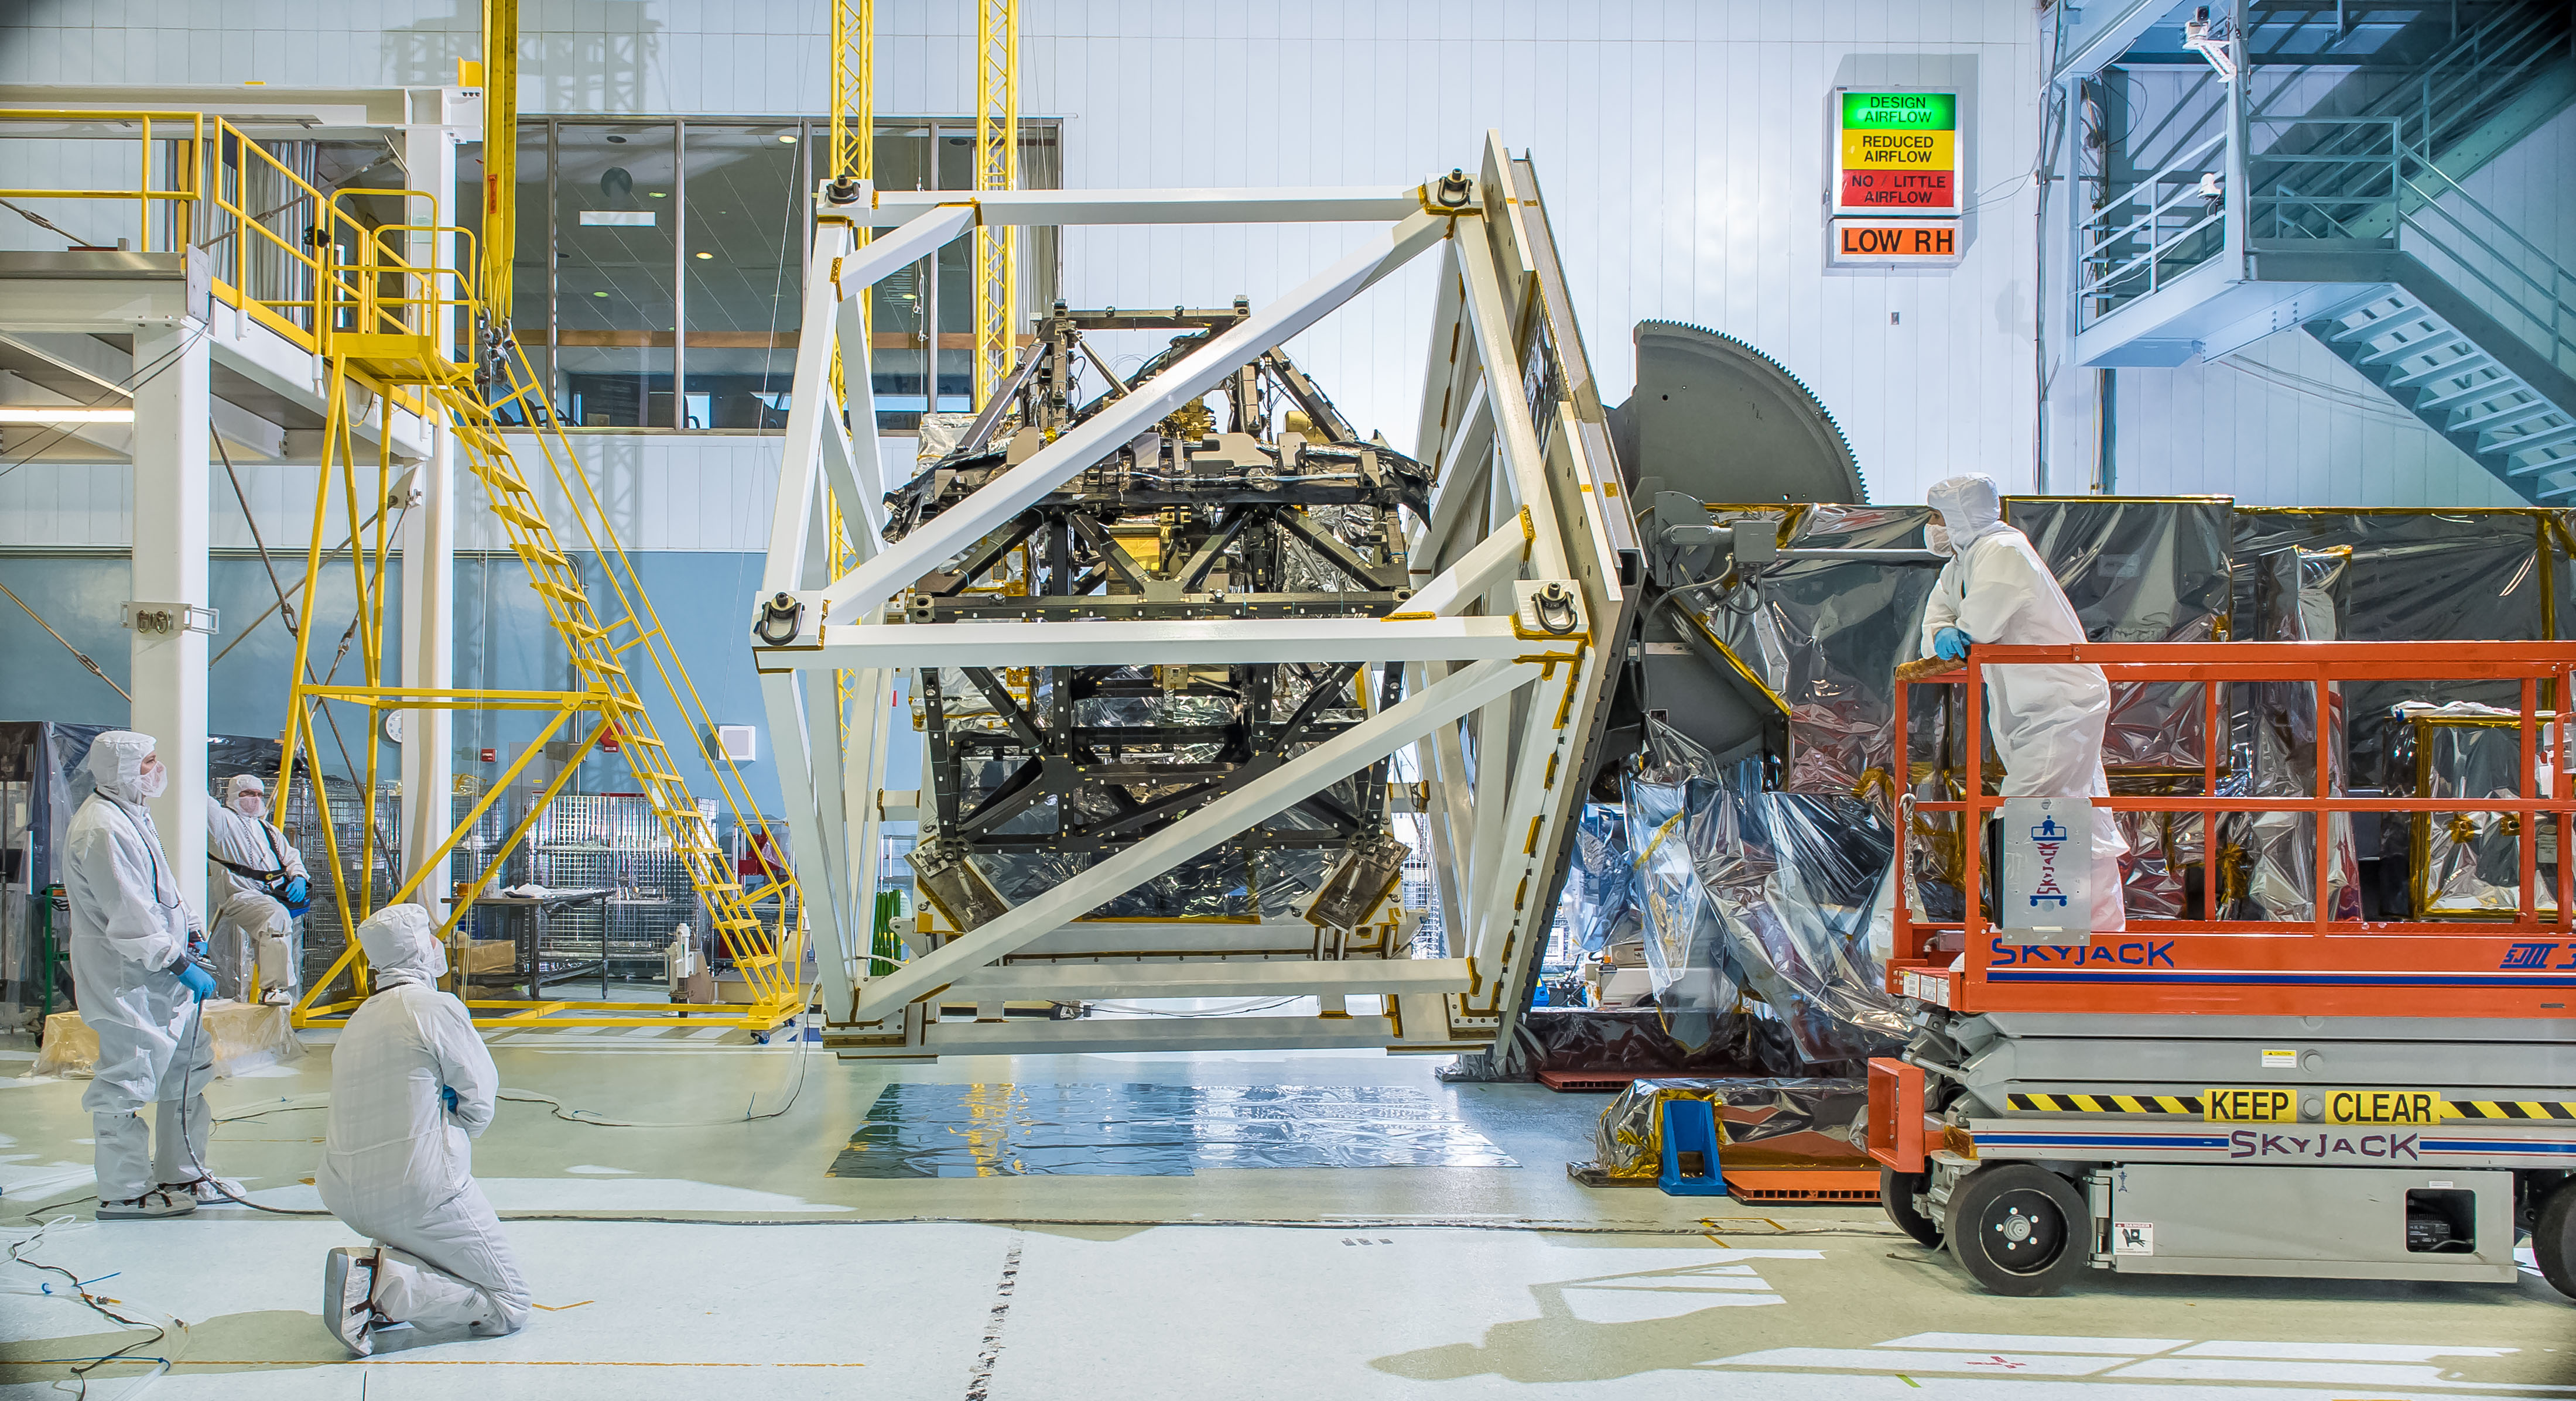 NASA photo, 2014: "The James Webb Space Telescope's ISIM structure recently endured a 'gravity sag test' as it was rotated in what looked like giant cube in a NASA clean room." The ISIM is entering its final round of environmental tests. Photo Credit: NASA/C. Gunn